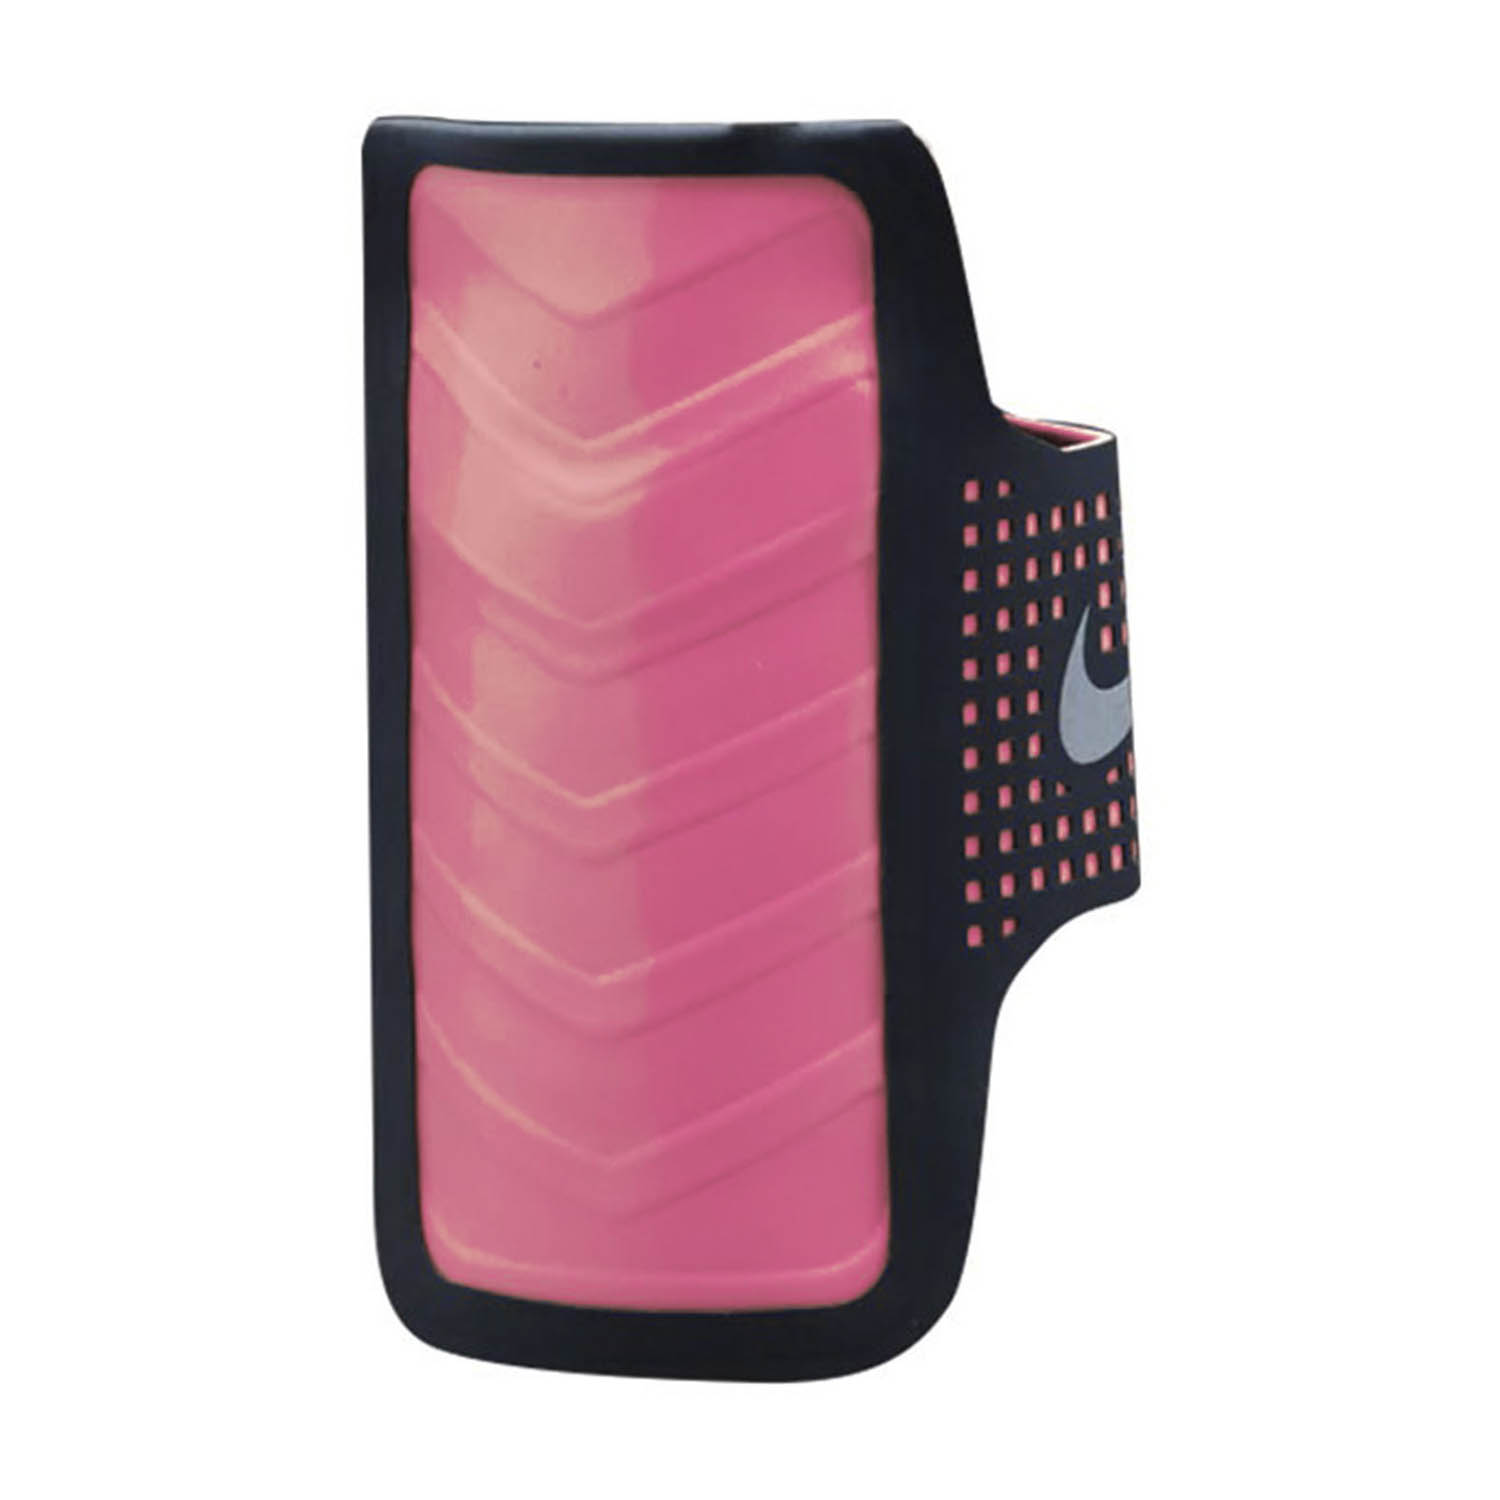 Nike Distance 2.0 Arm Band - Anthracite/Vivid Pink